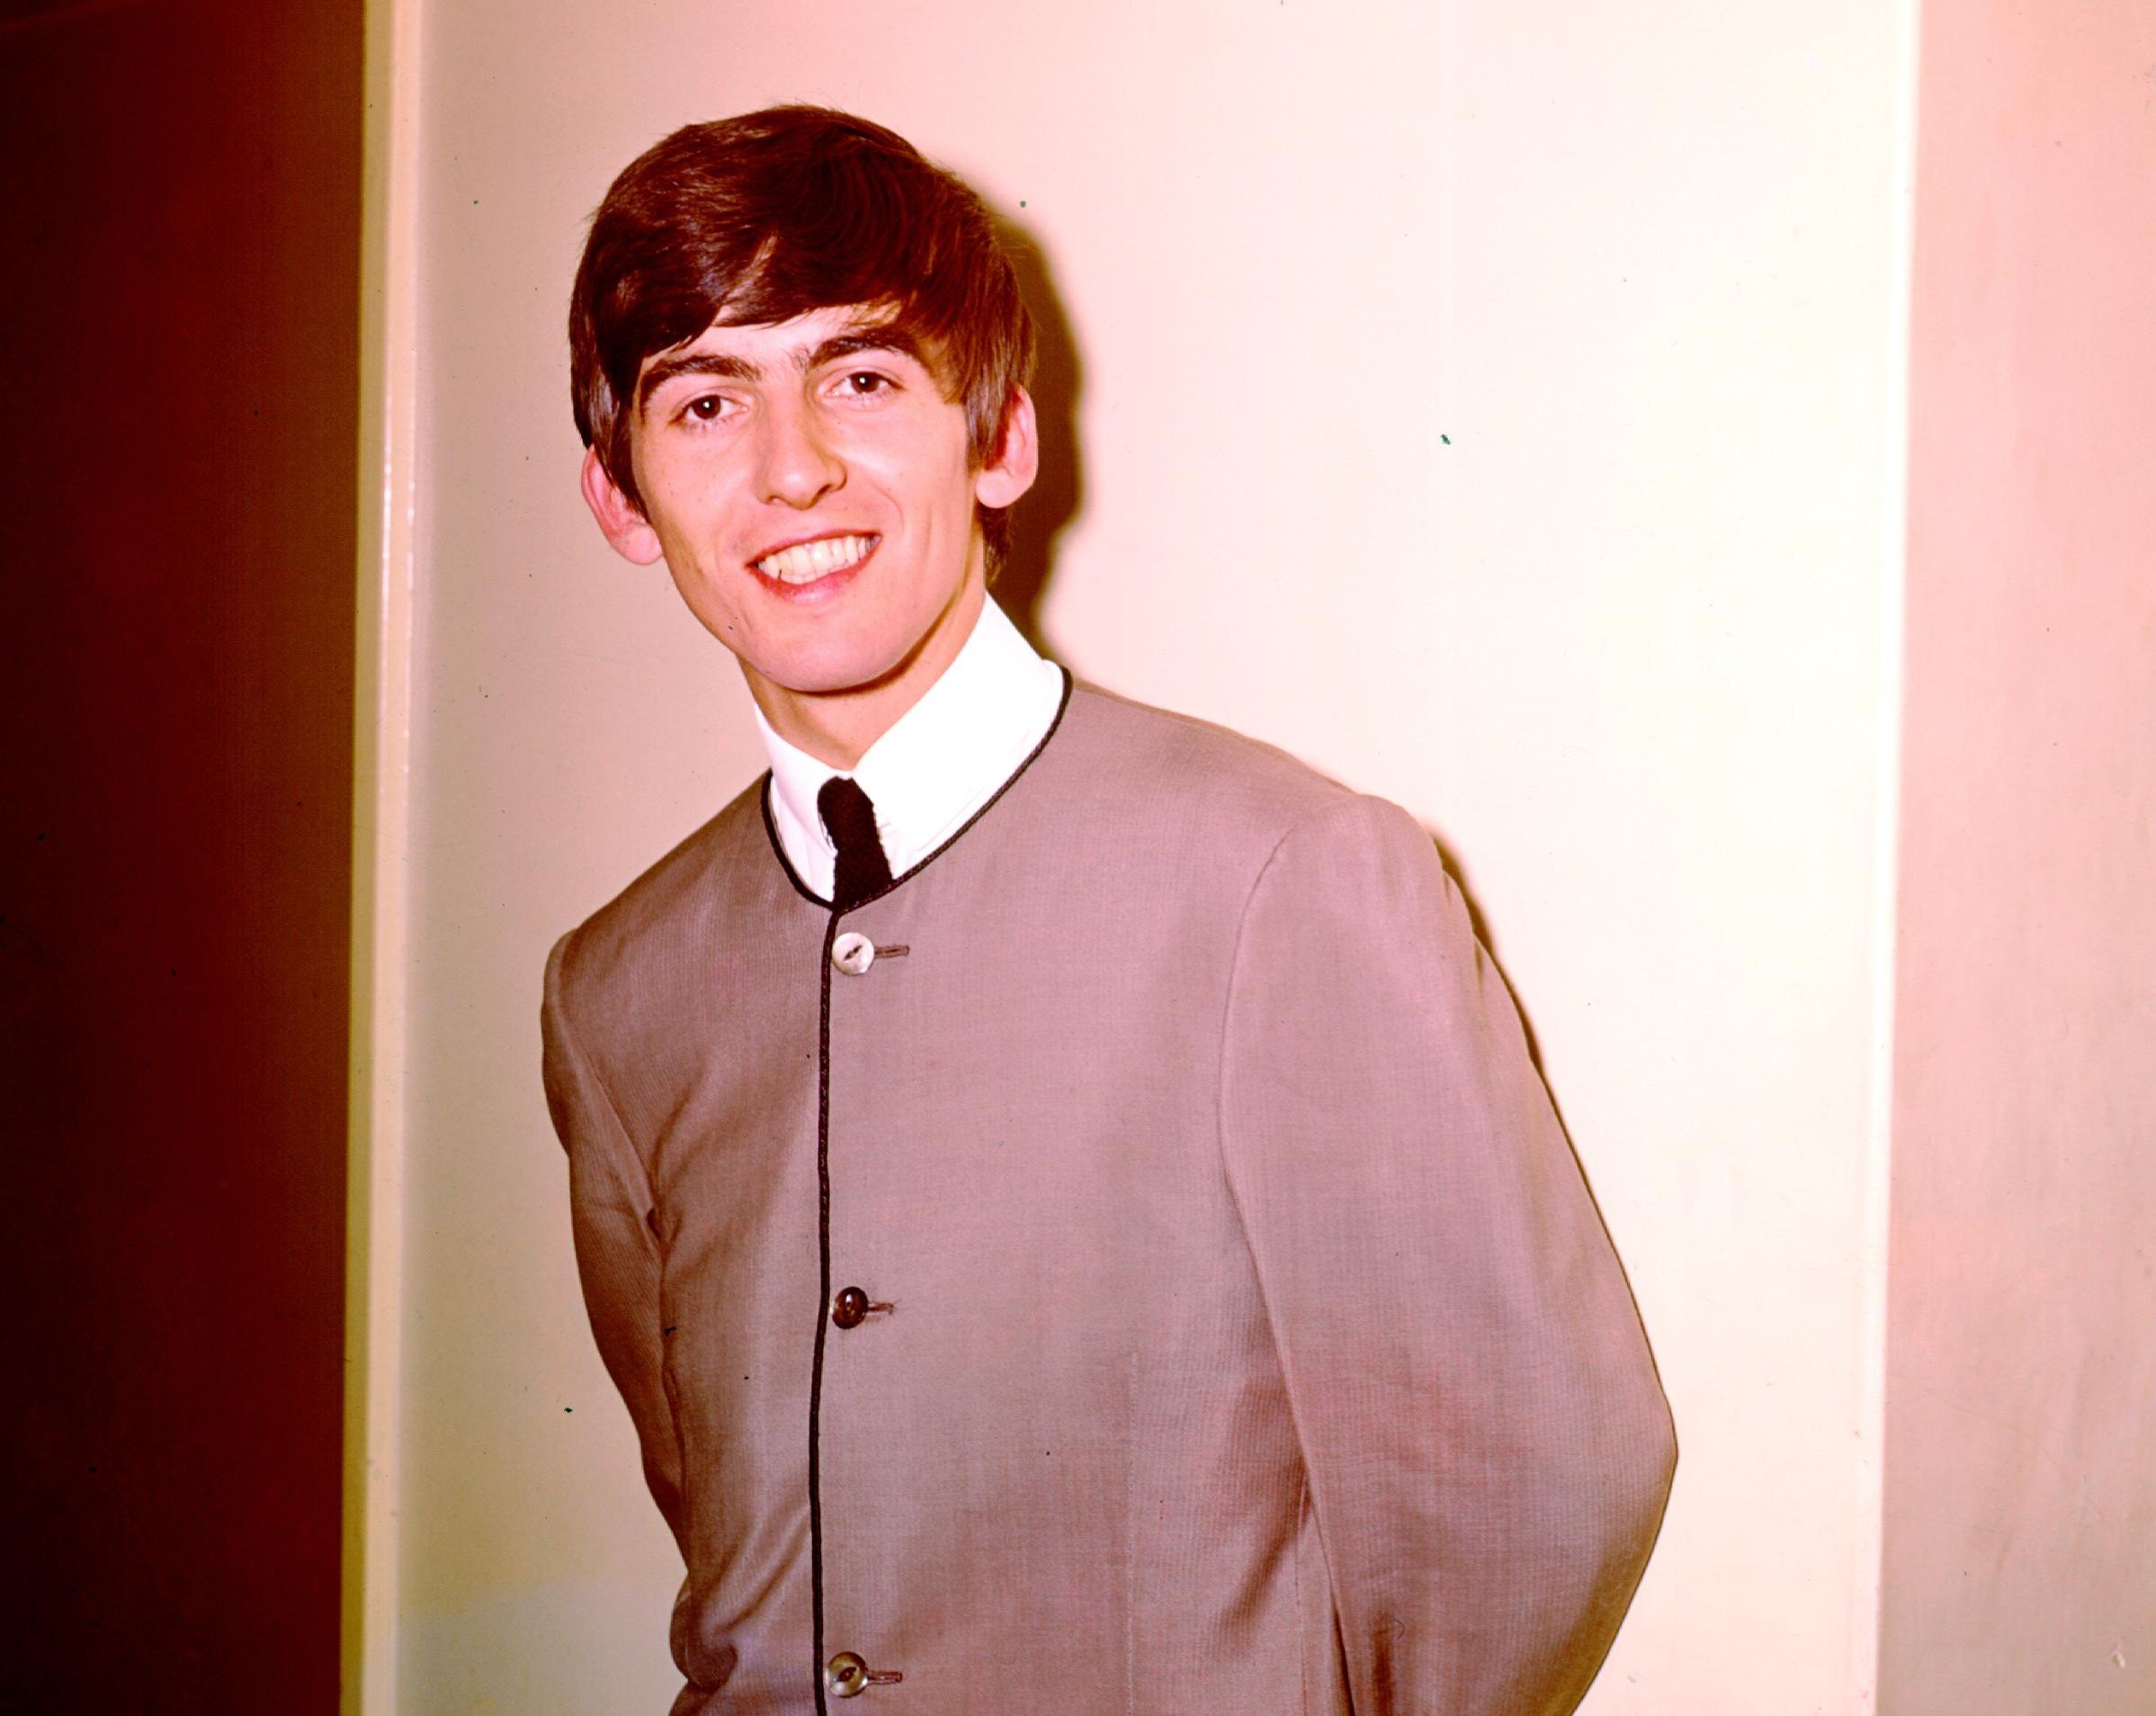 George Harrison wears a jacket and tie and stands in front of a white wall.